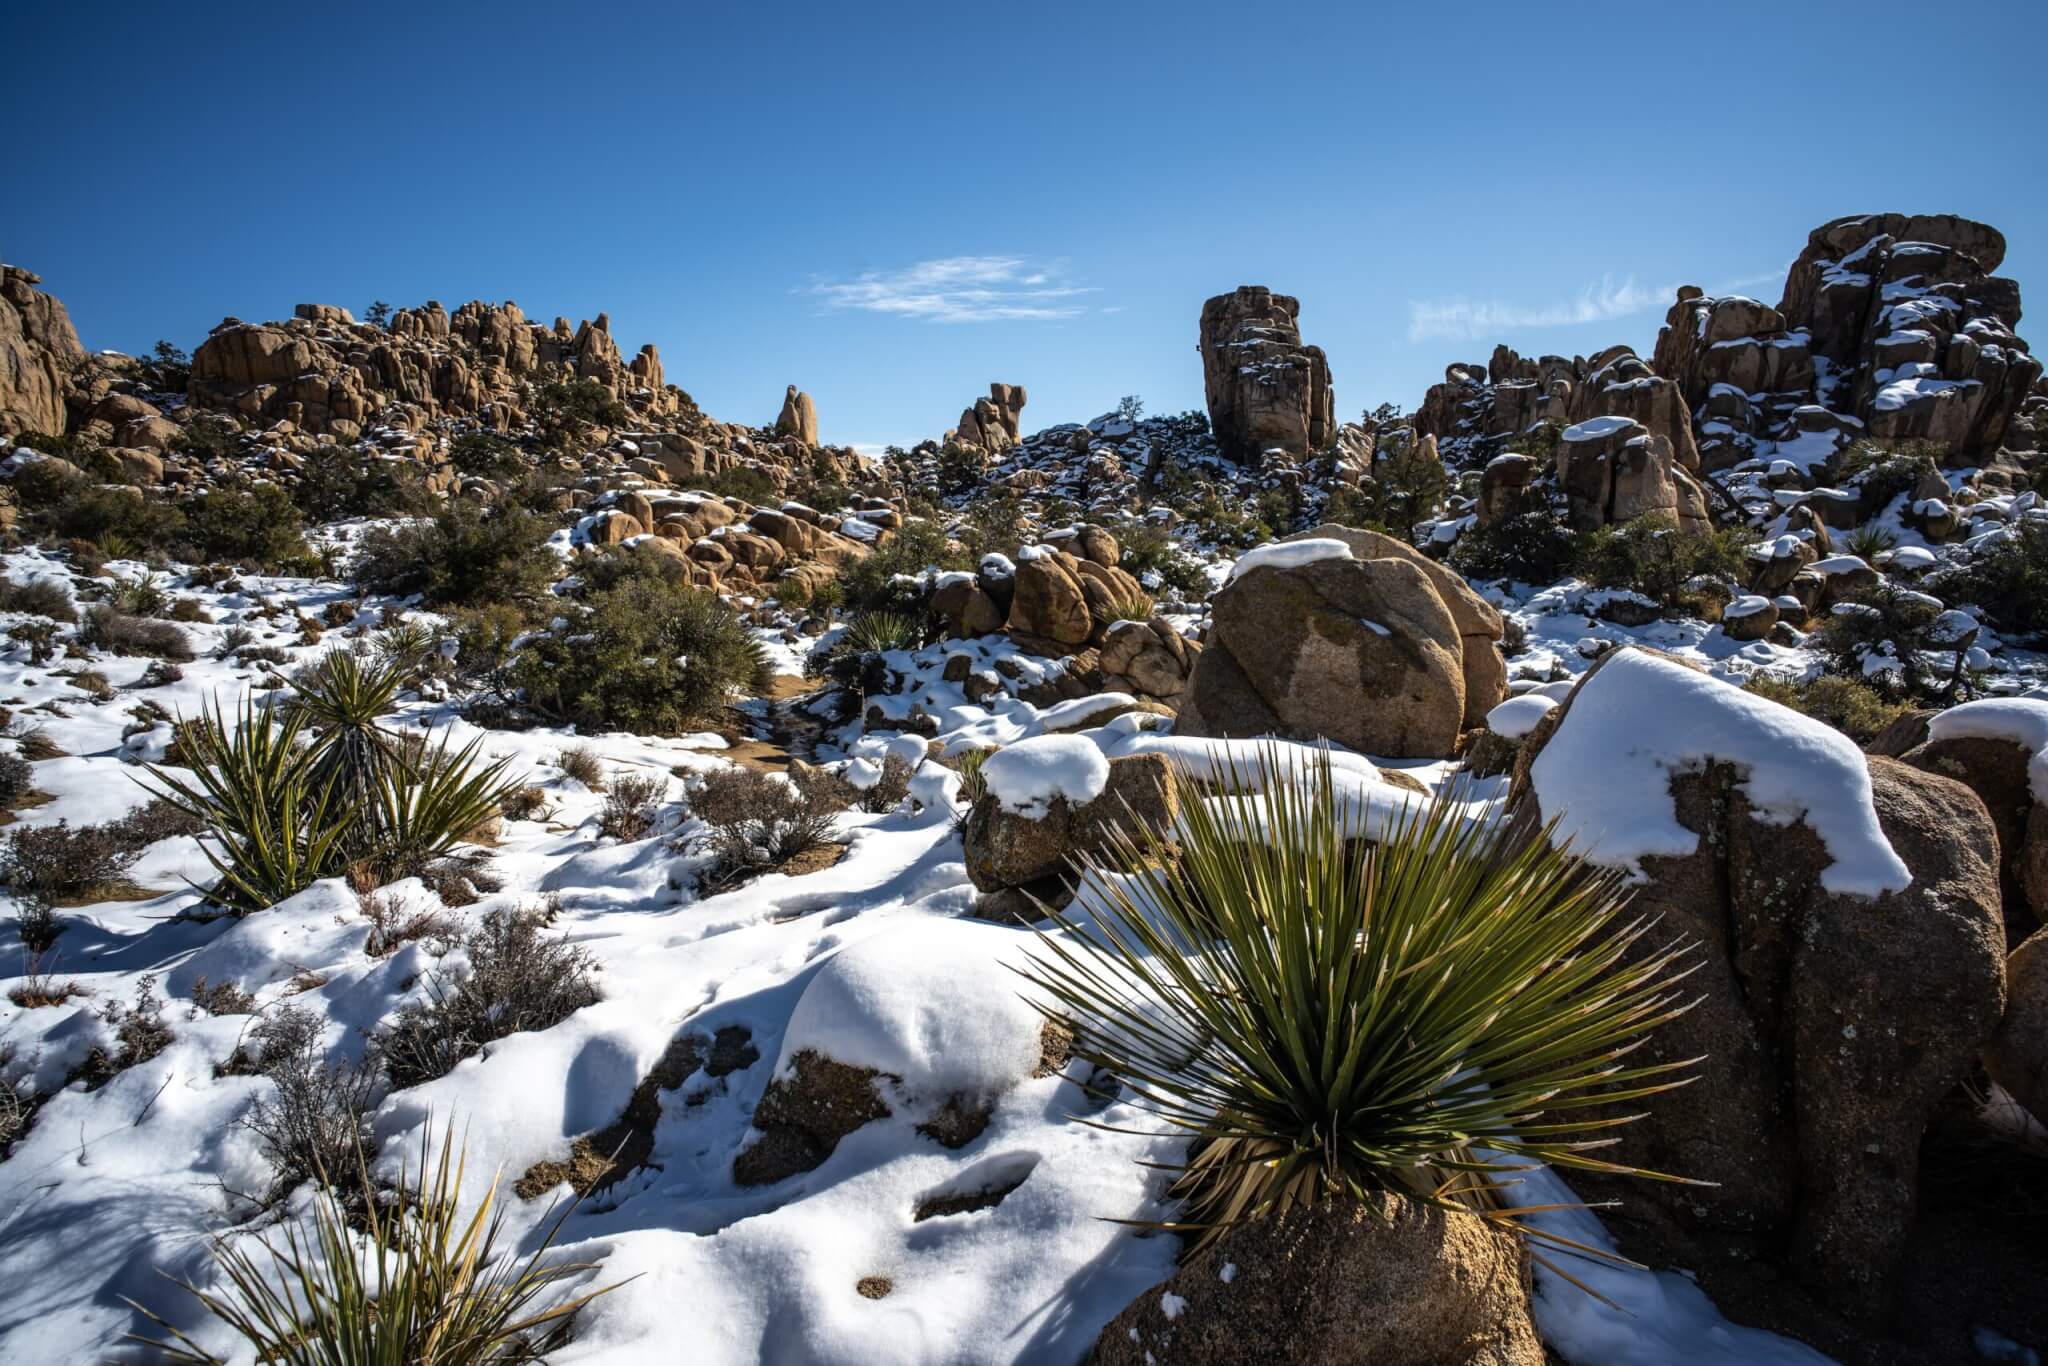 Joshua Tree's Hidden Valley under a blanket of snow during New Year's Eve. A rock climber in the distance.